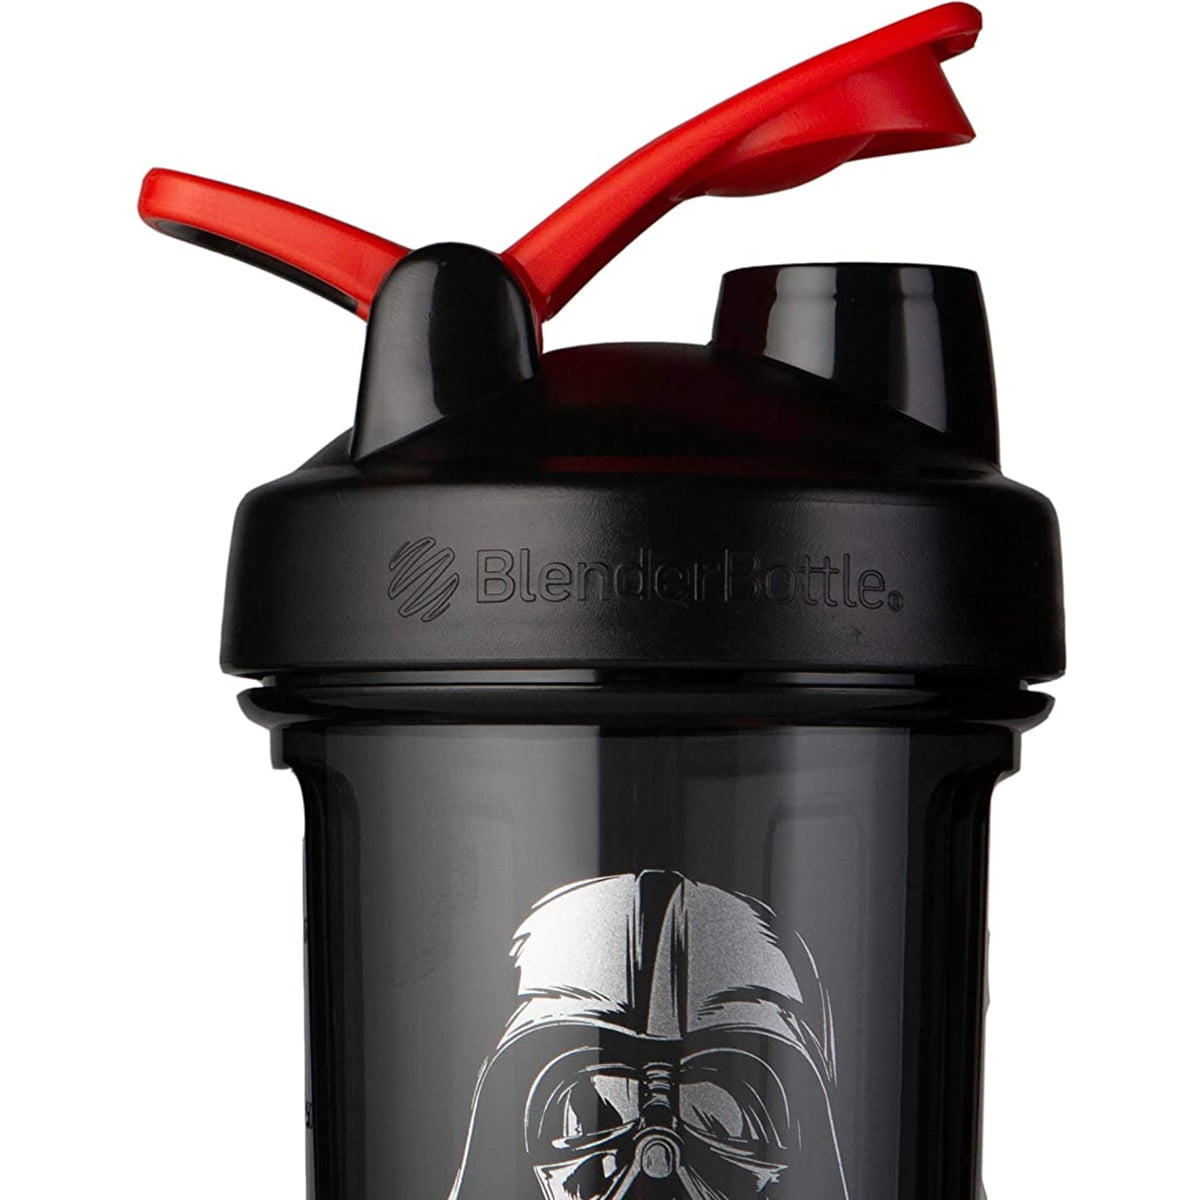 Blender bottle, Gallery posted by dee 💫